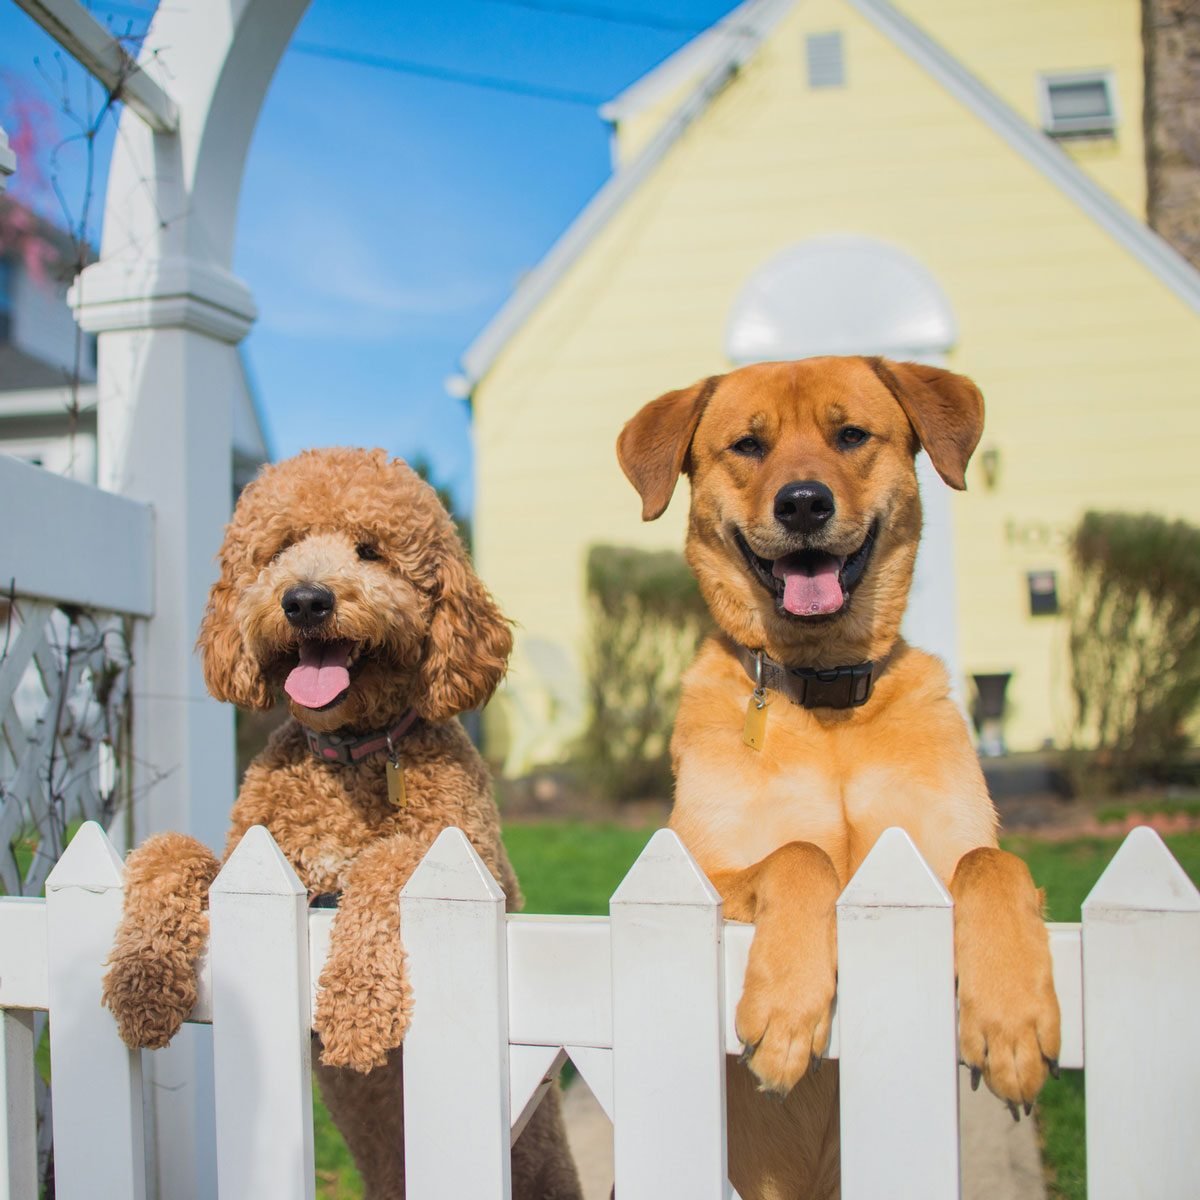 Best Dog Fences For Every Breed and Homeowner Need